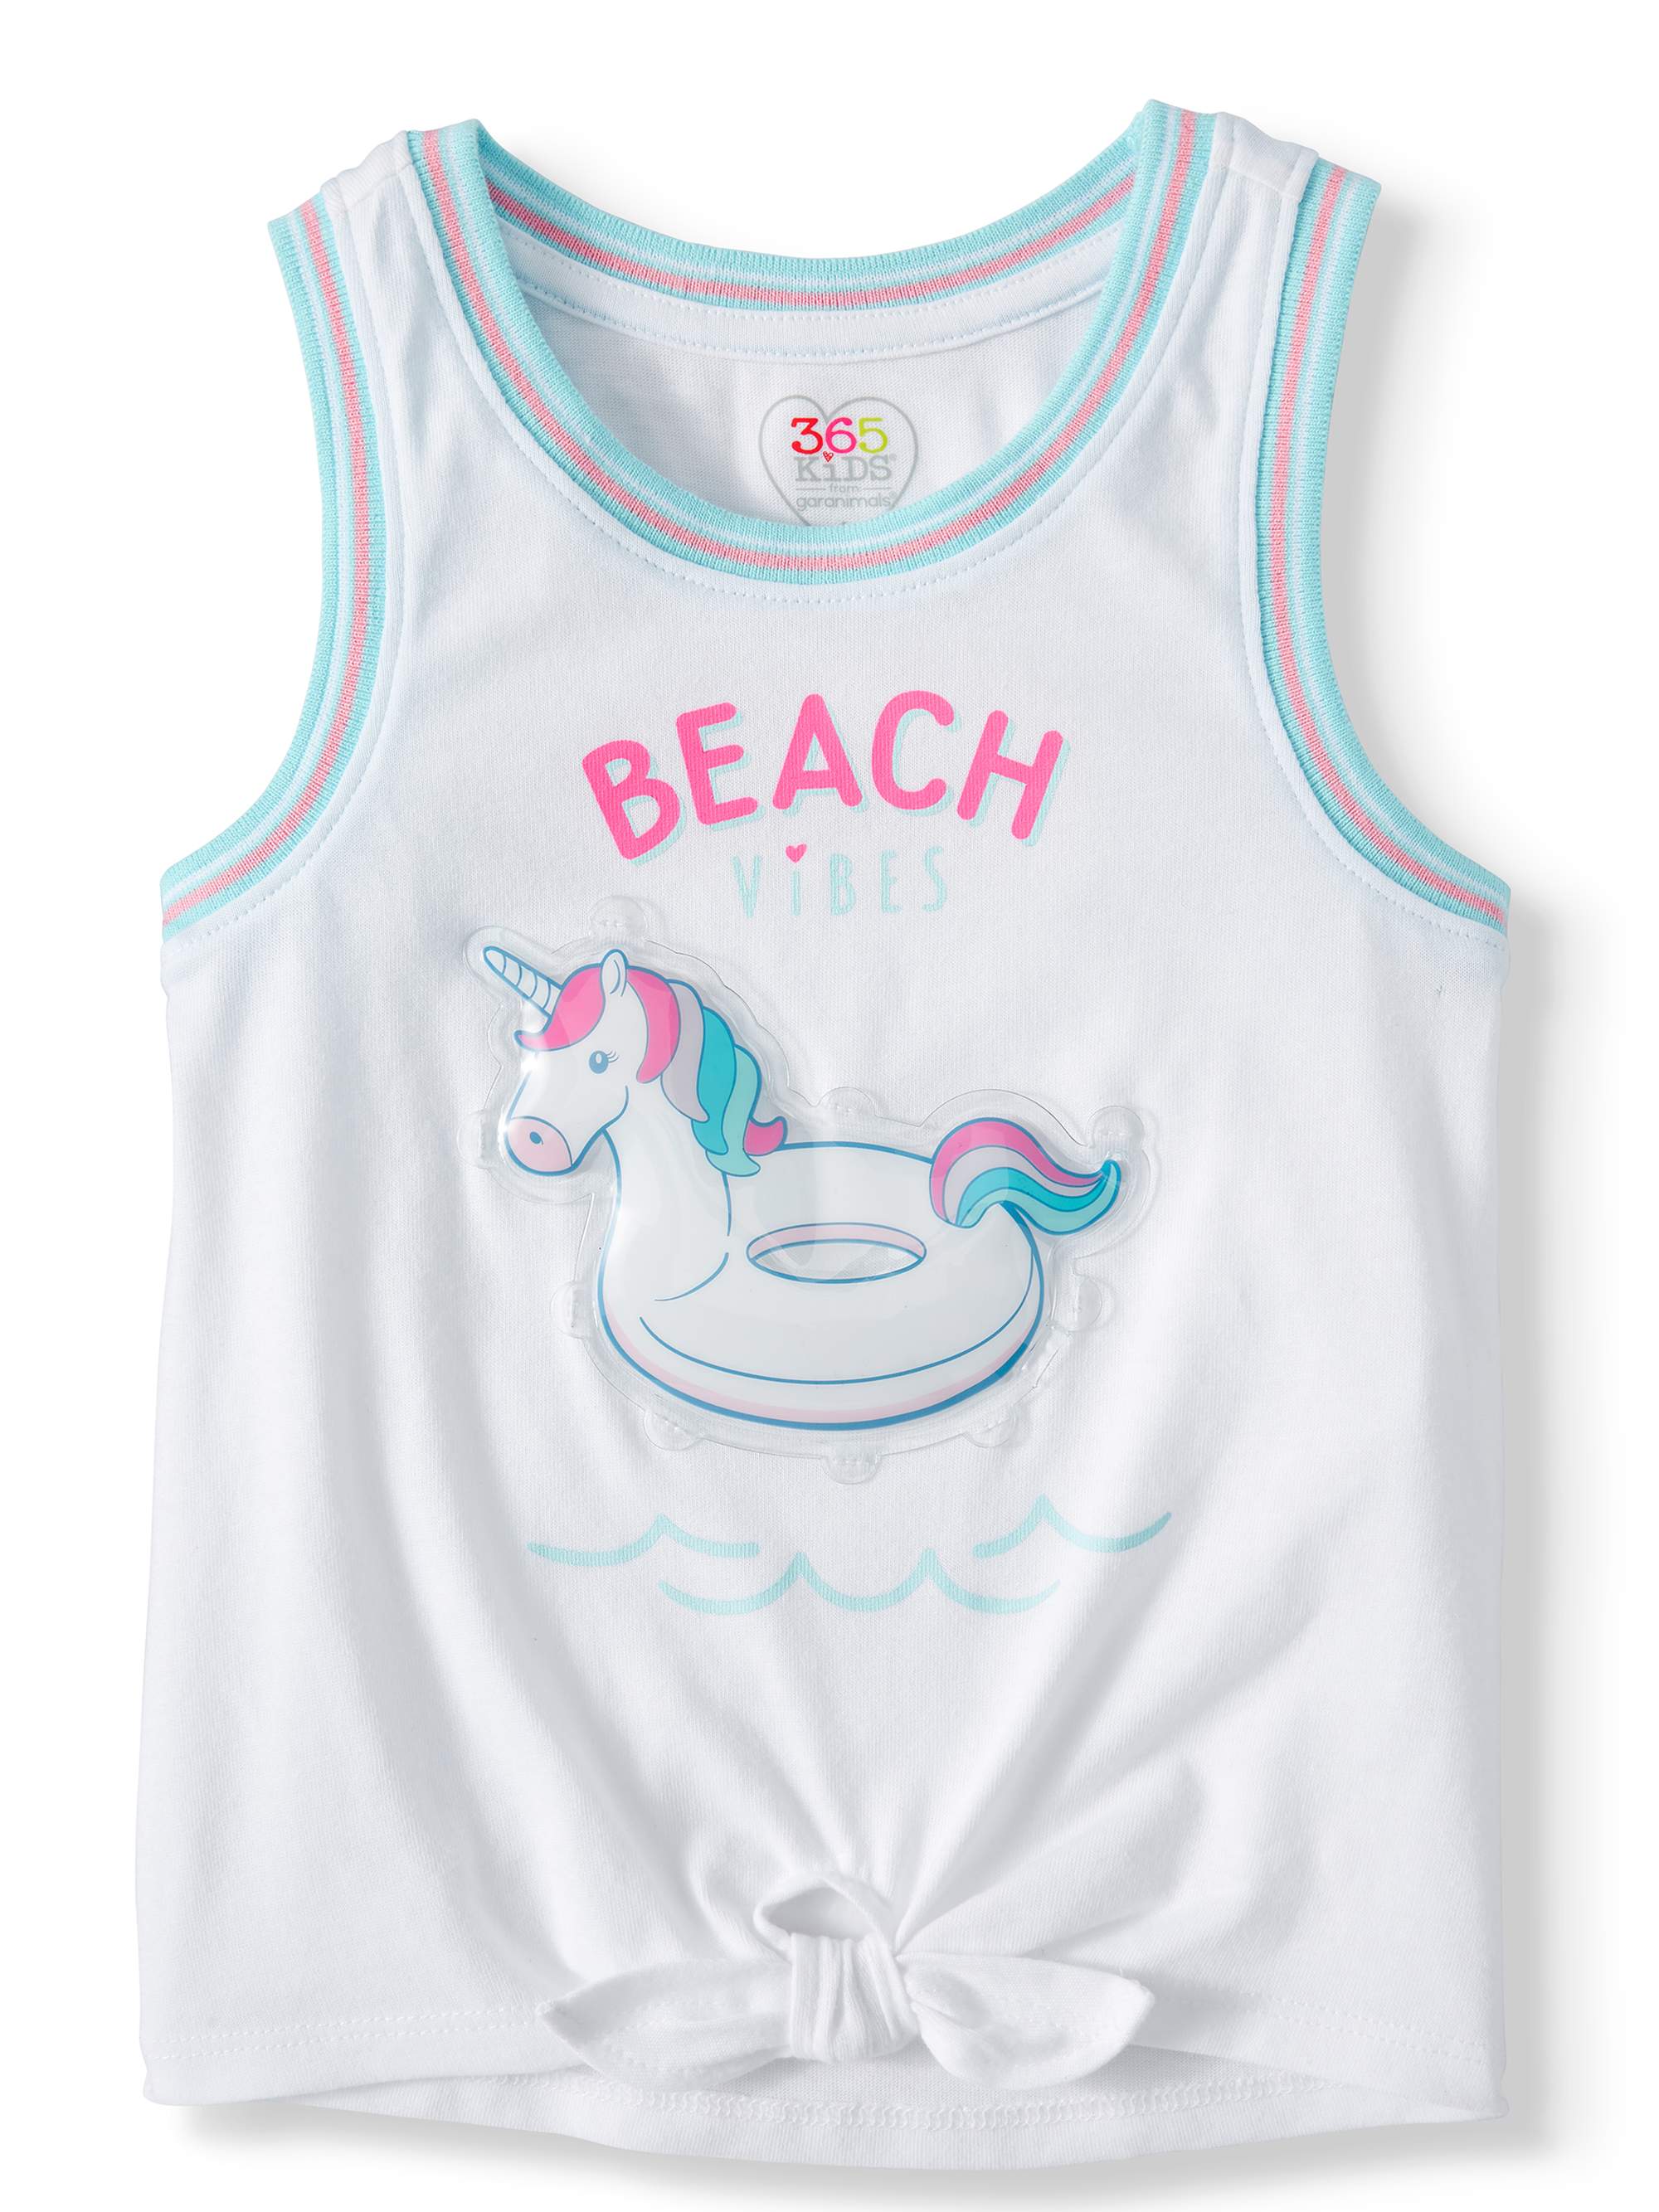 Tie Front Graphic Tank Top (Little Girls & Big Girls) - image 1 of 3